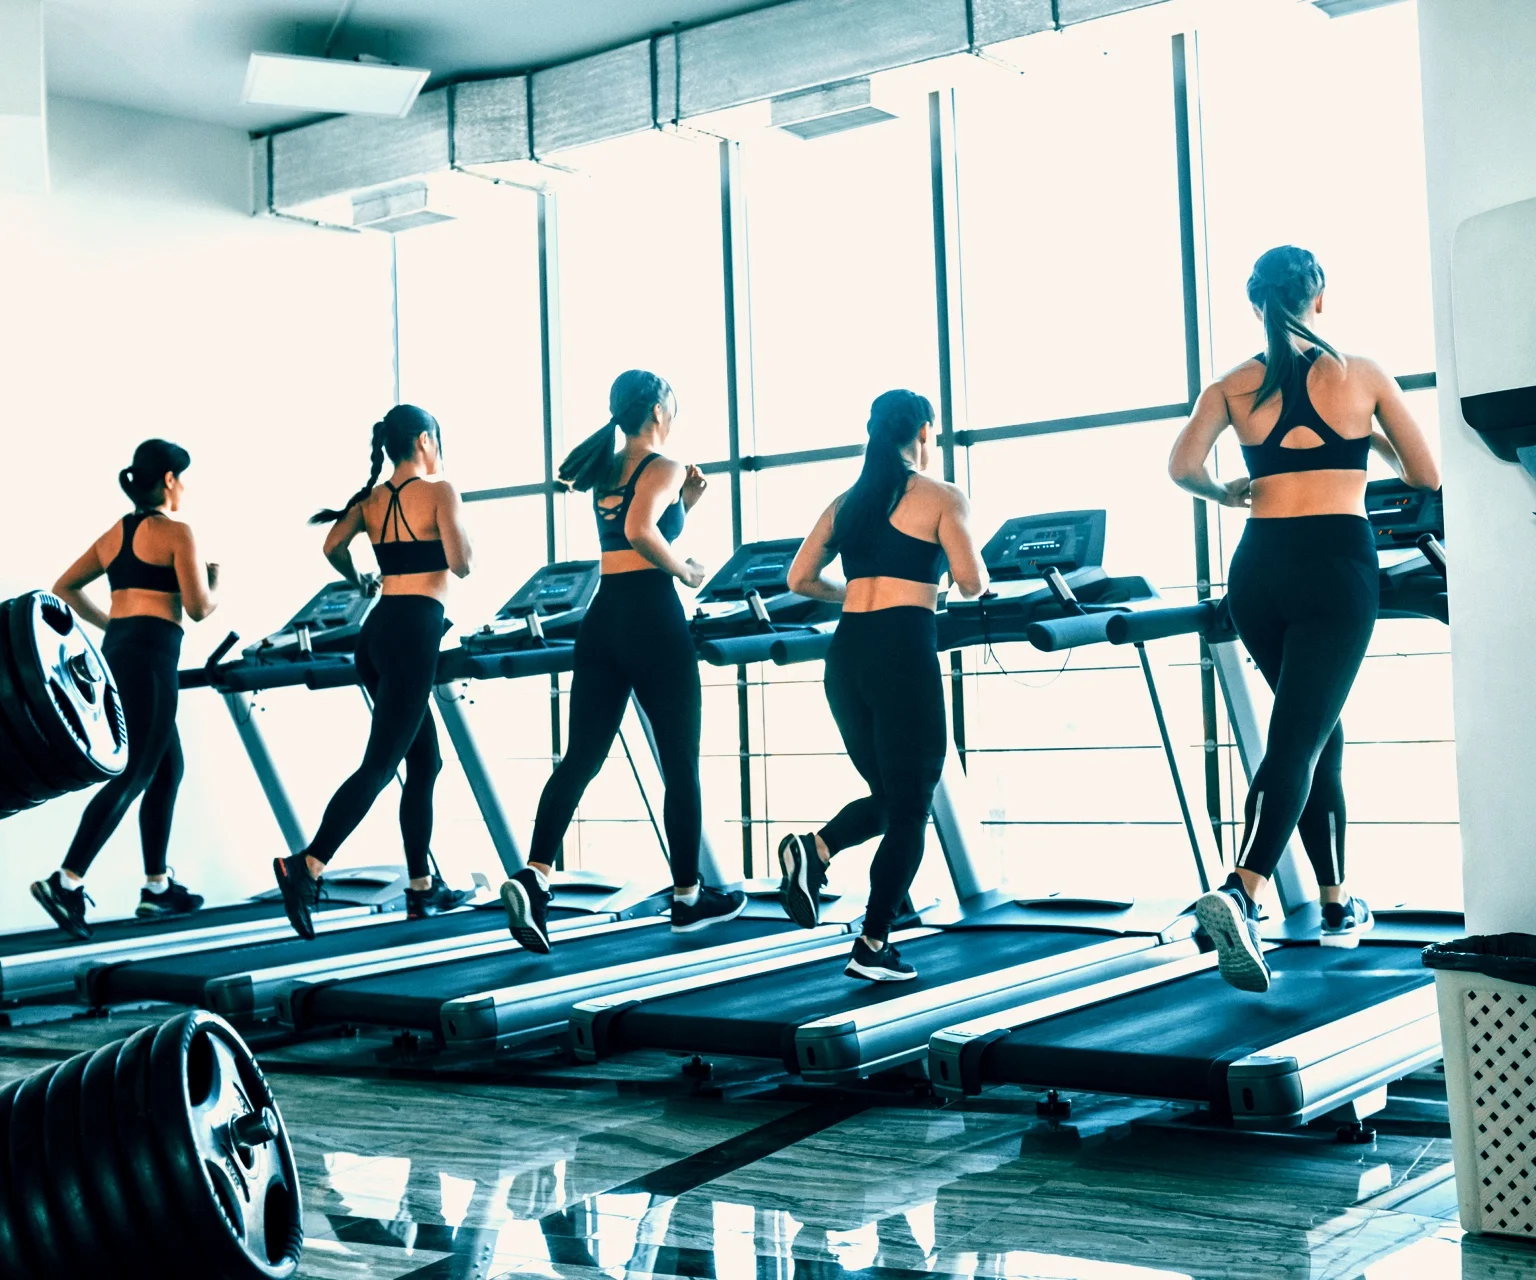 photo - 5 women run on treadmills at the gym. The 5 day workout routine for women contains cardio to burn calories